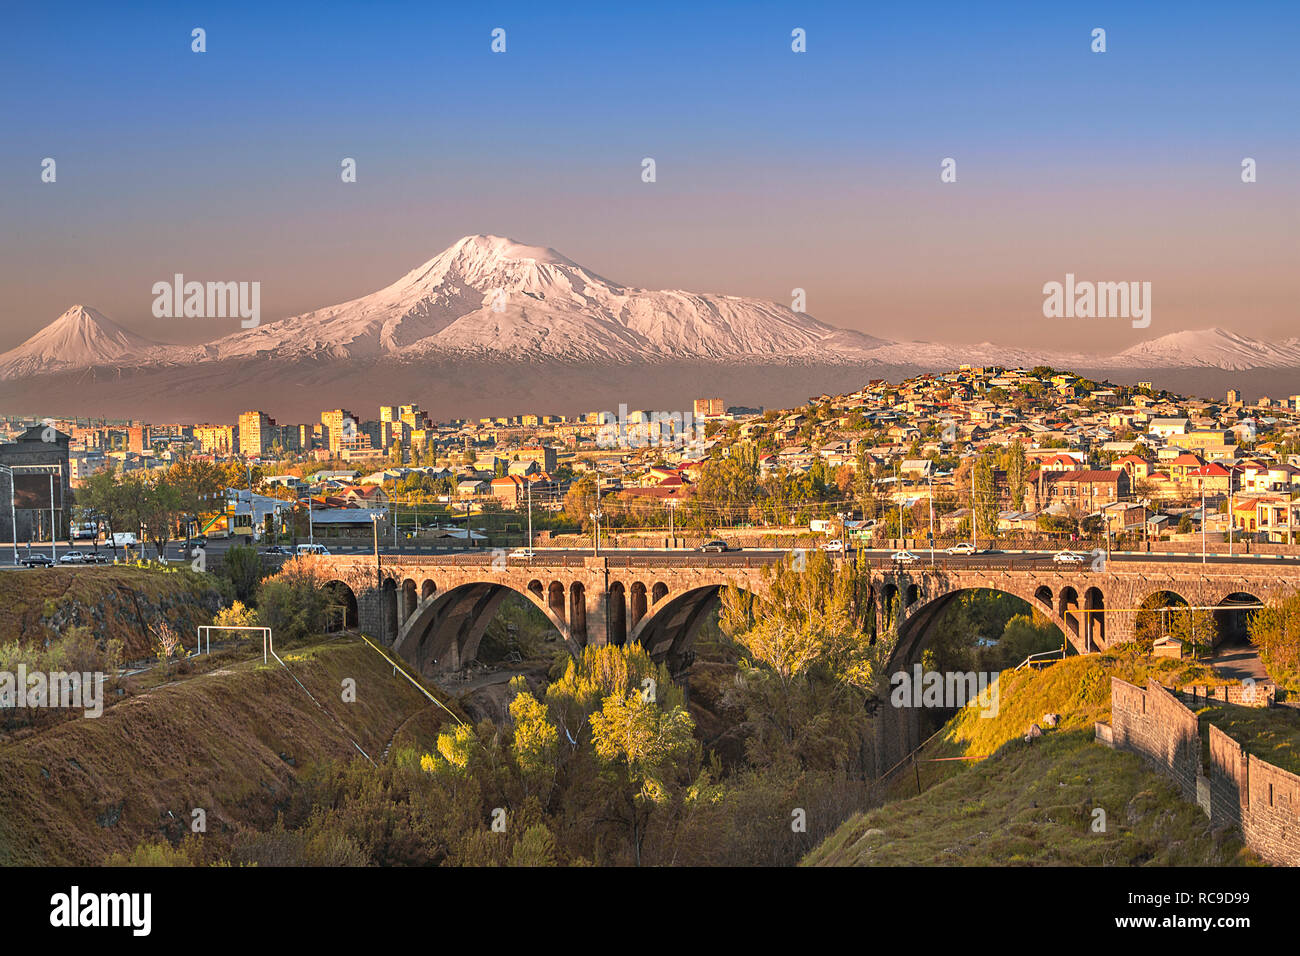 Old arched bridge with the peaks of the Ararat mountain in Yerevan, Armenia. Stock Photo